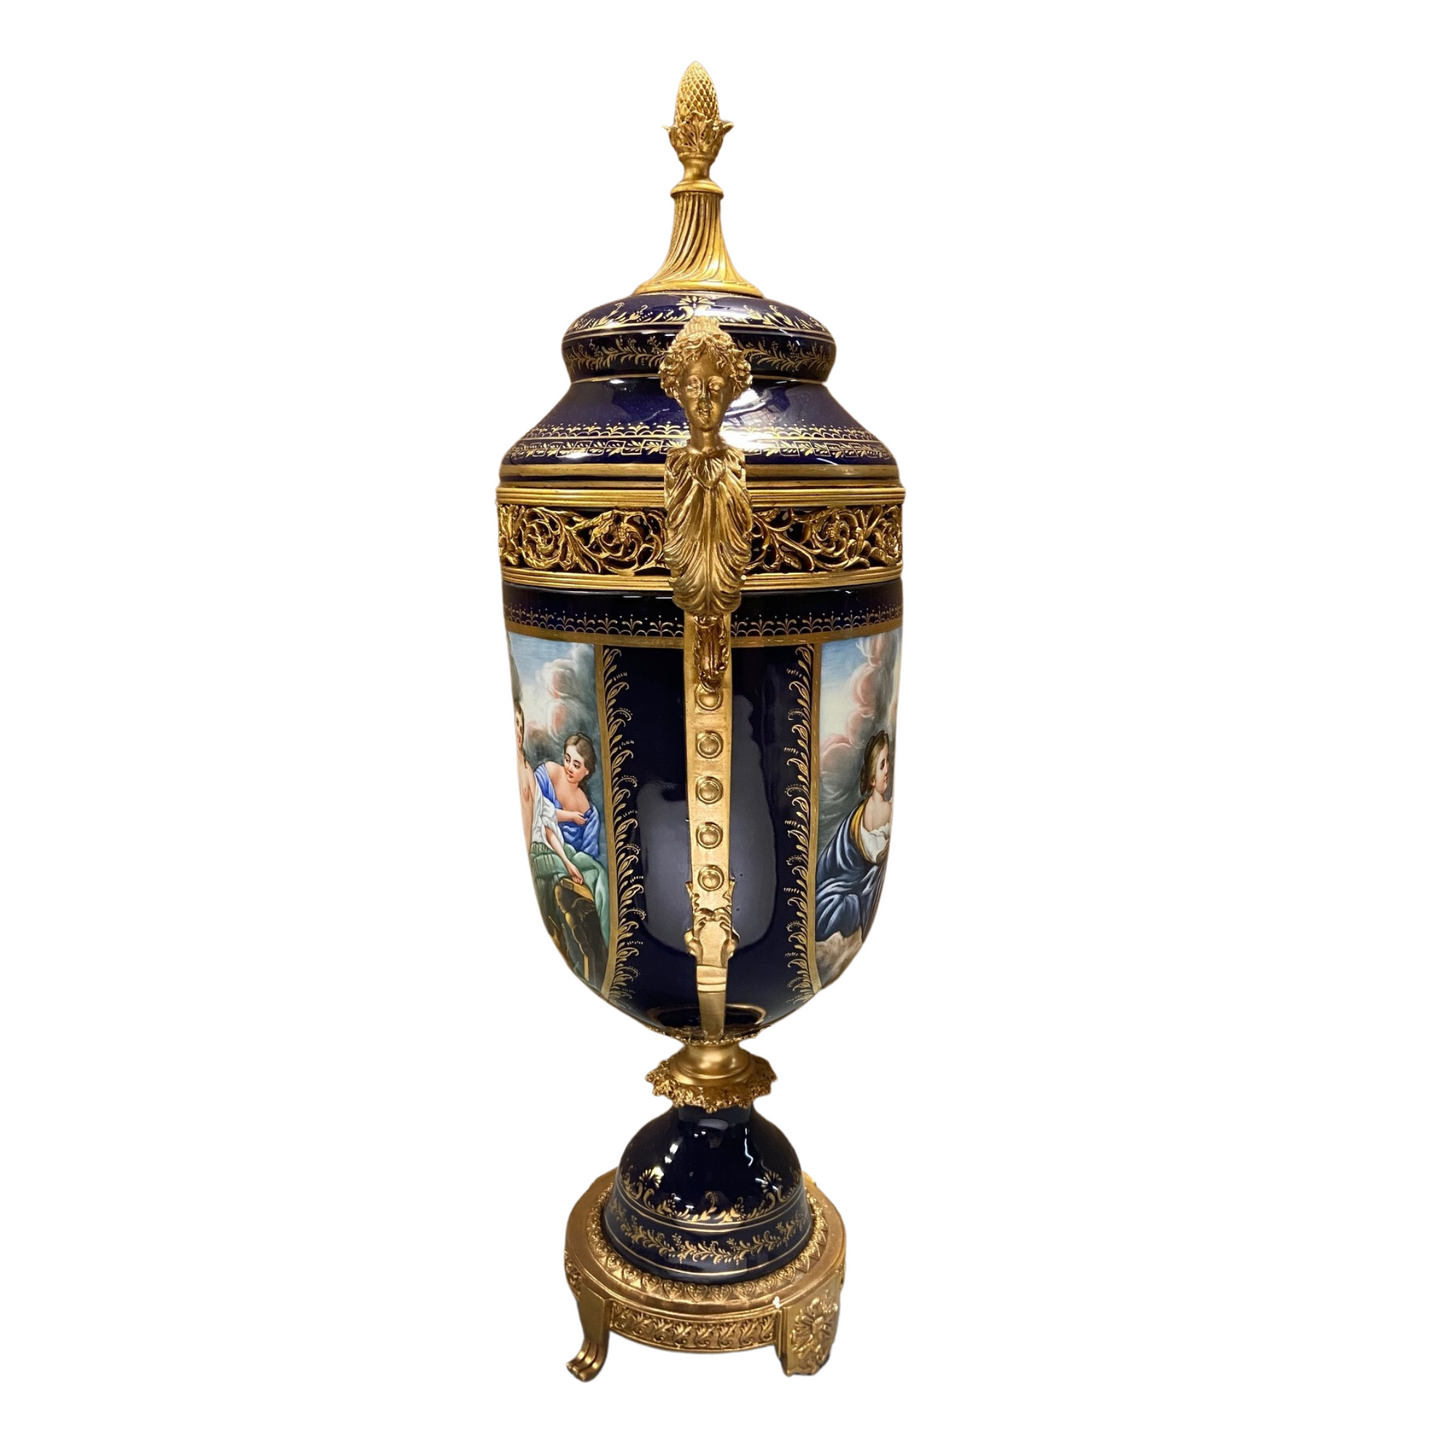 Hand-painted Potpourri Porcelain And Bronze Urn